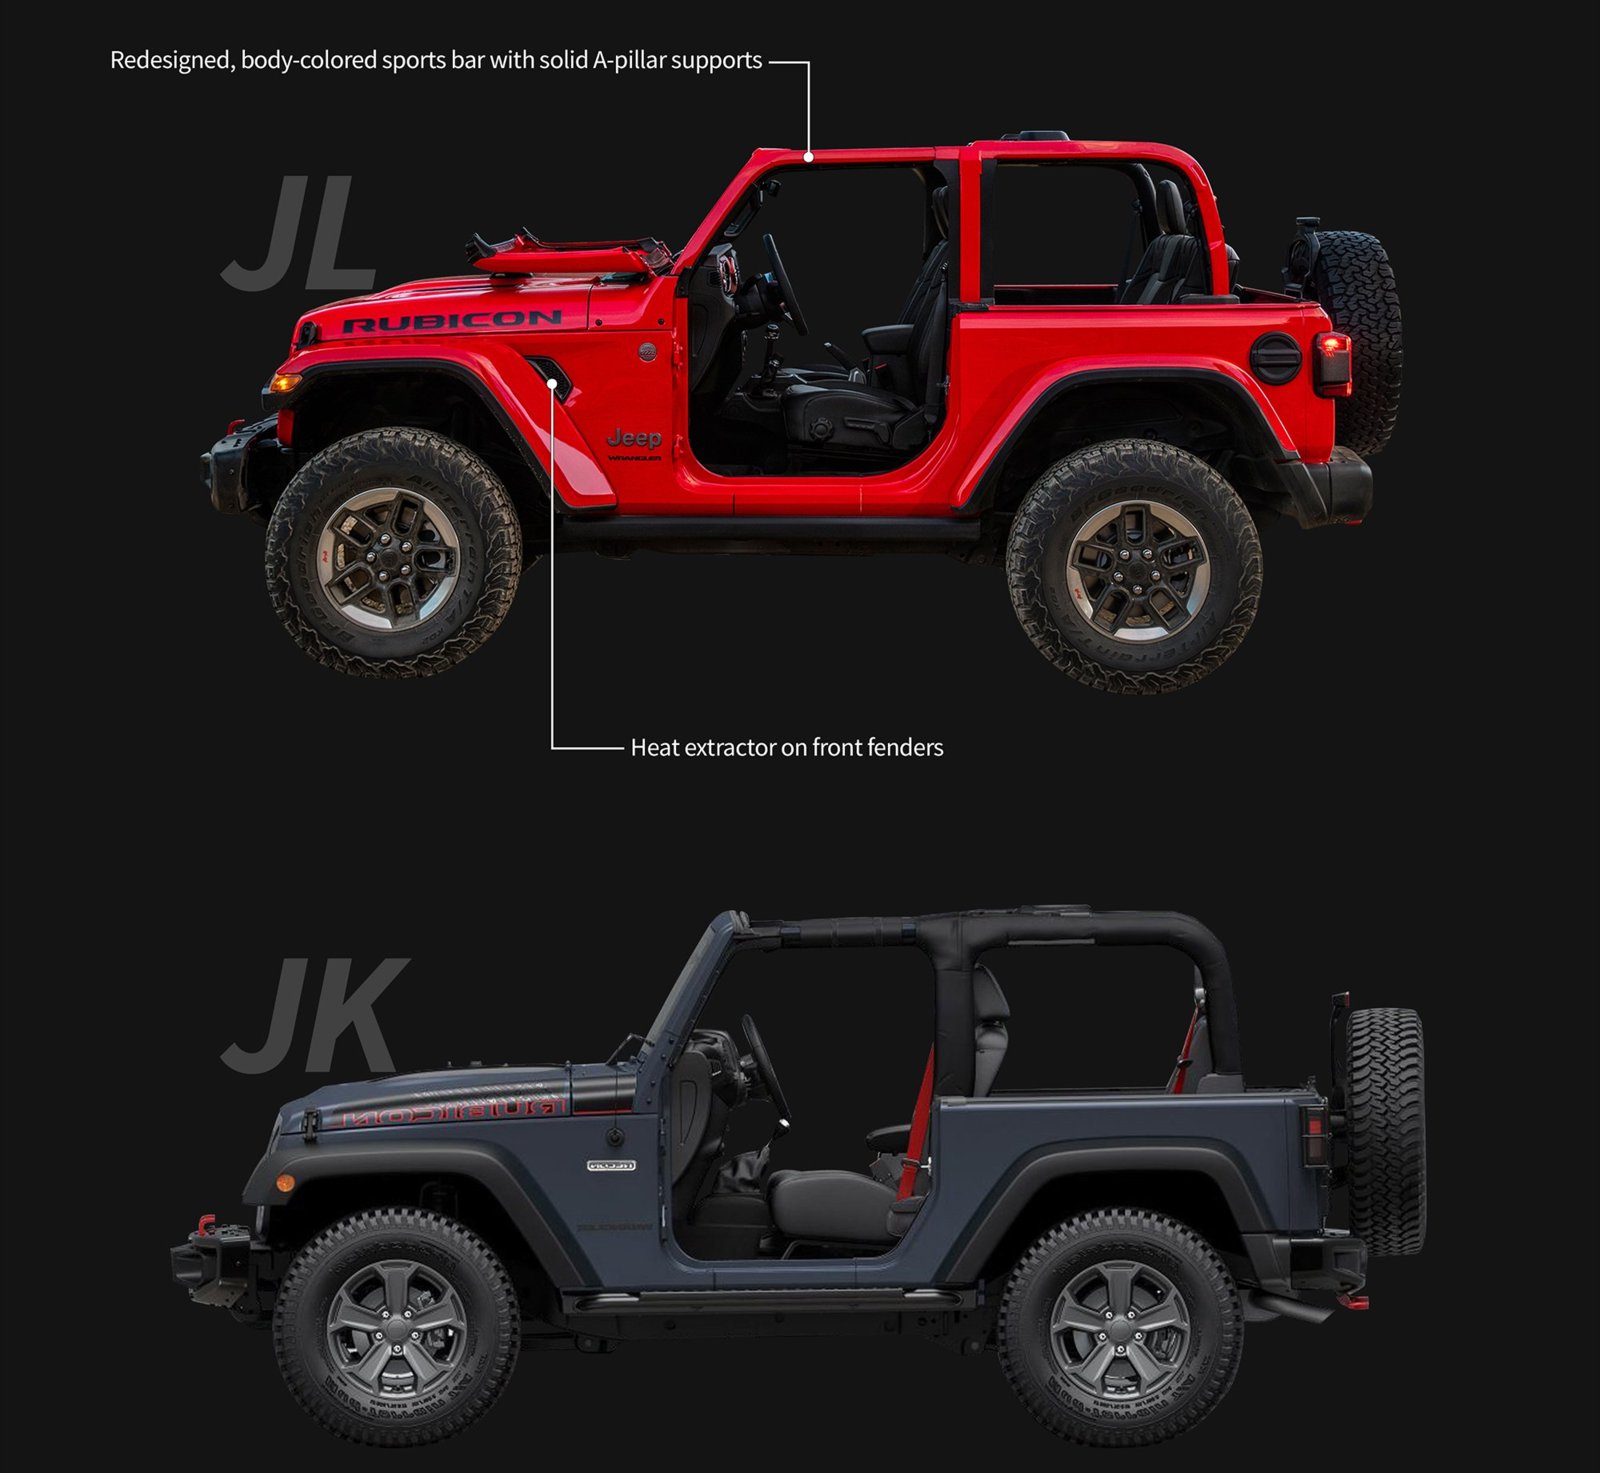 Five Ways To Tell If You Drive a JL Or JK Wrangler